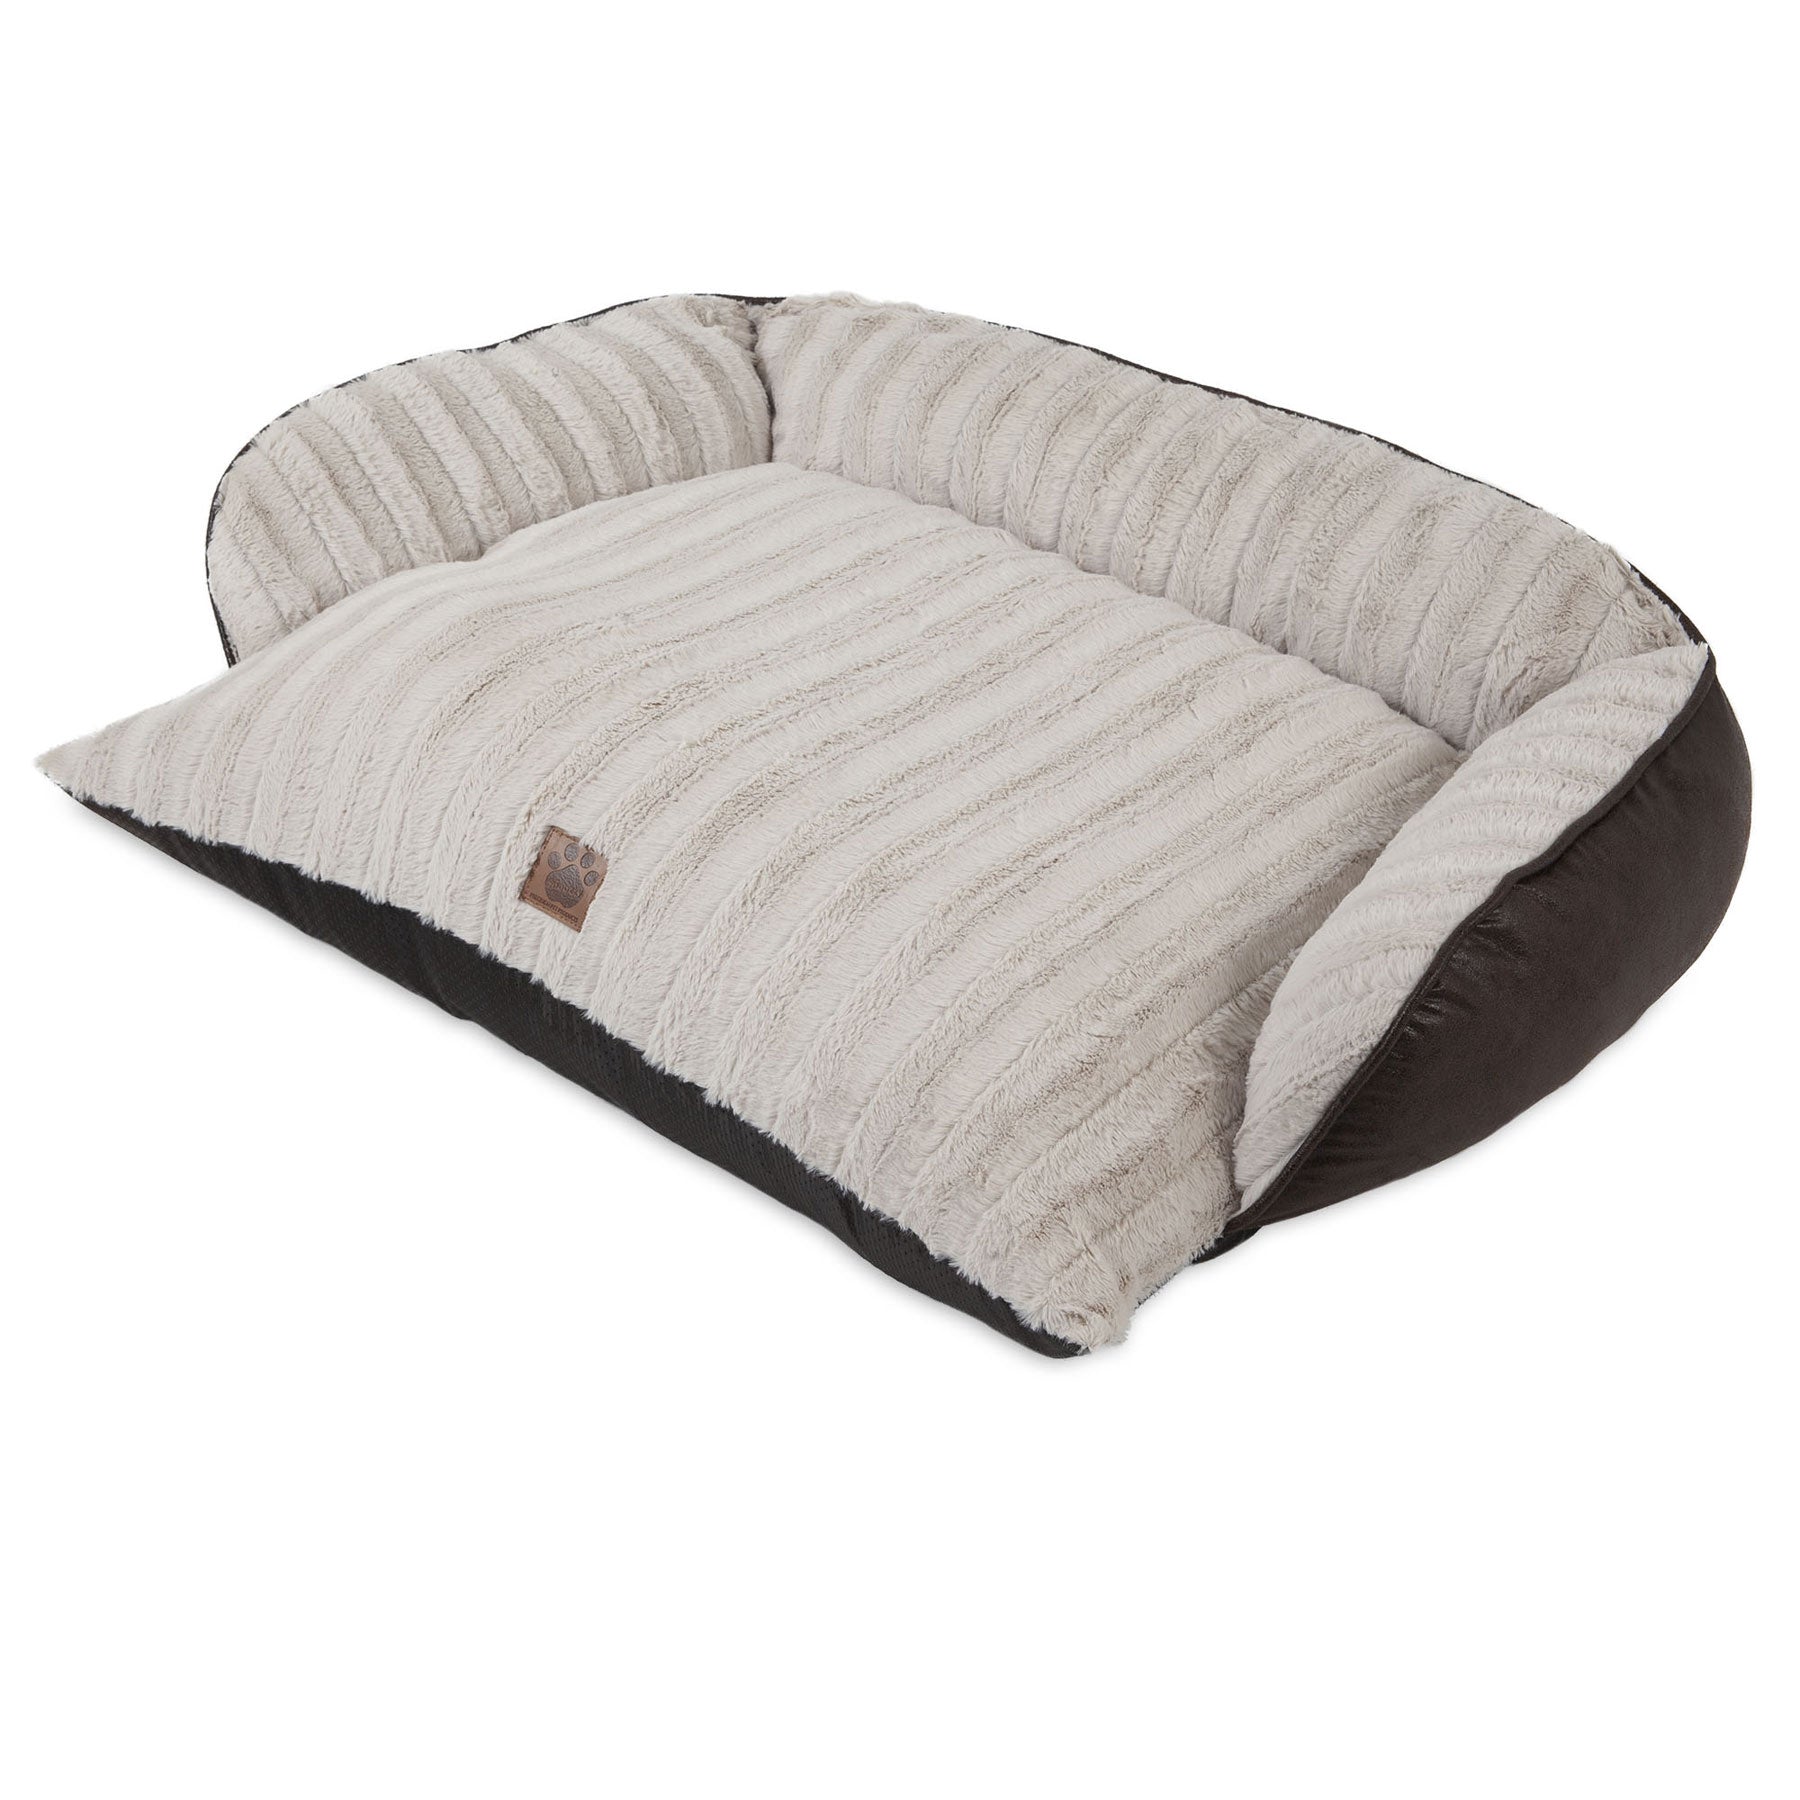 SnooZZy Rustic Luxury Comfy Couch Pet Bed